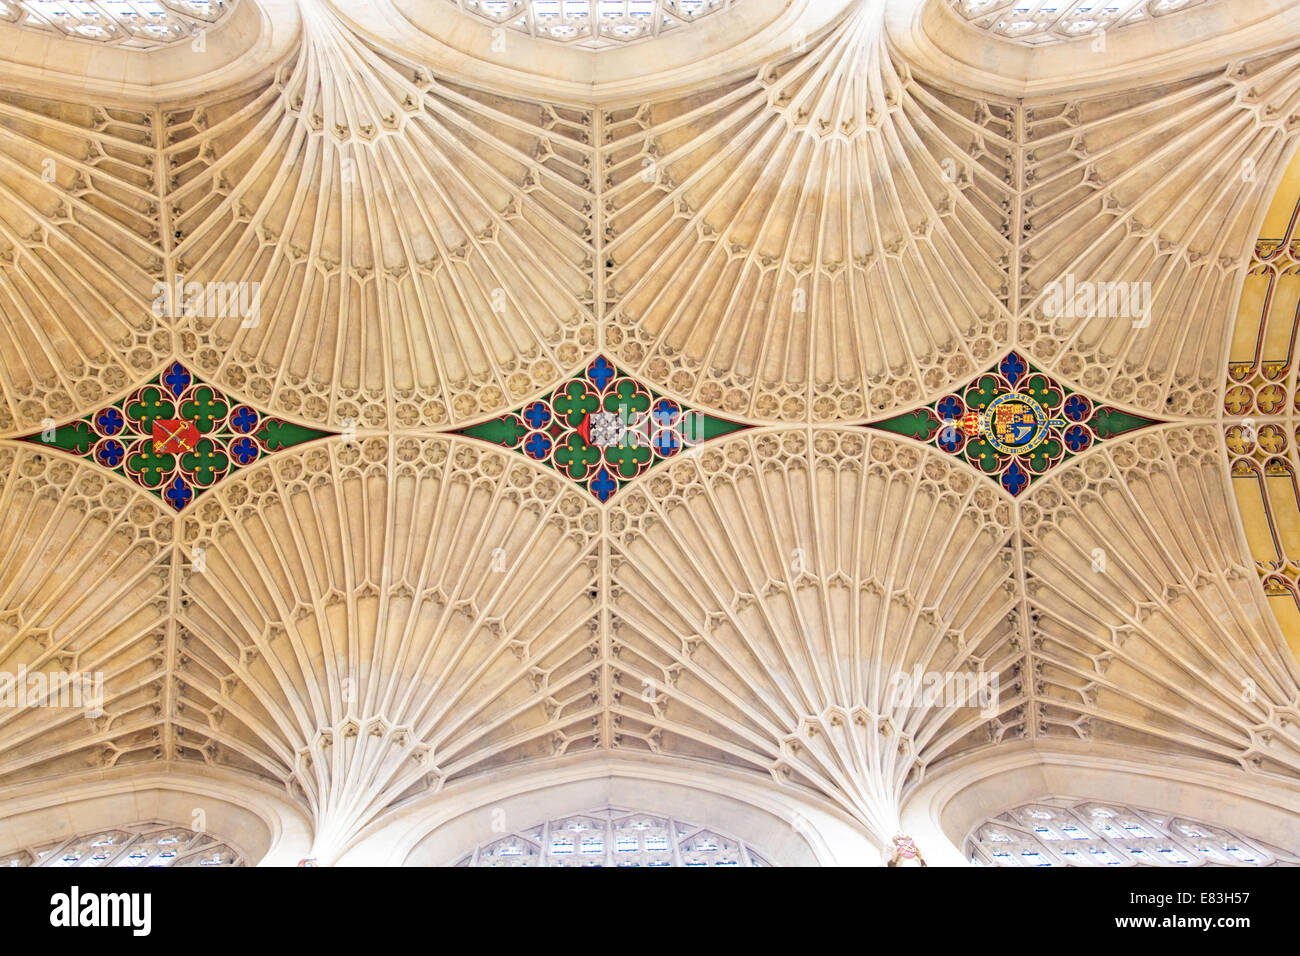 Fan vaulting over the nave at Bath Abbey, Bath, Wiltshire, England, UK Stock Photo